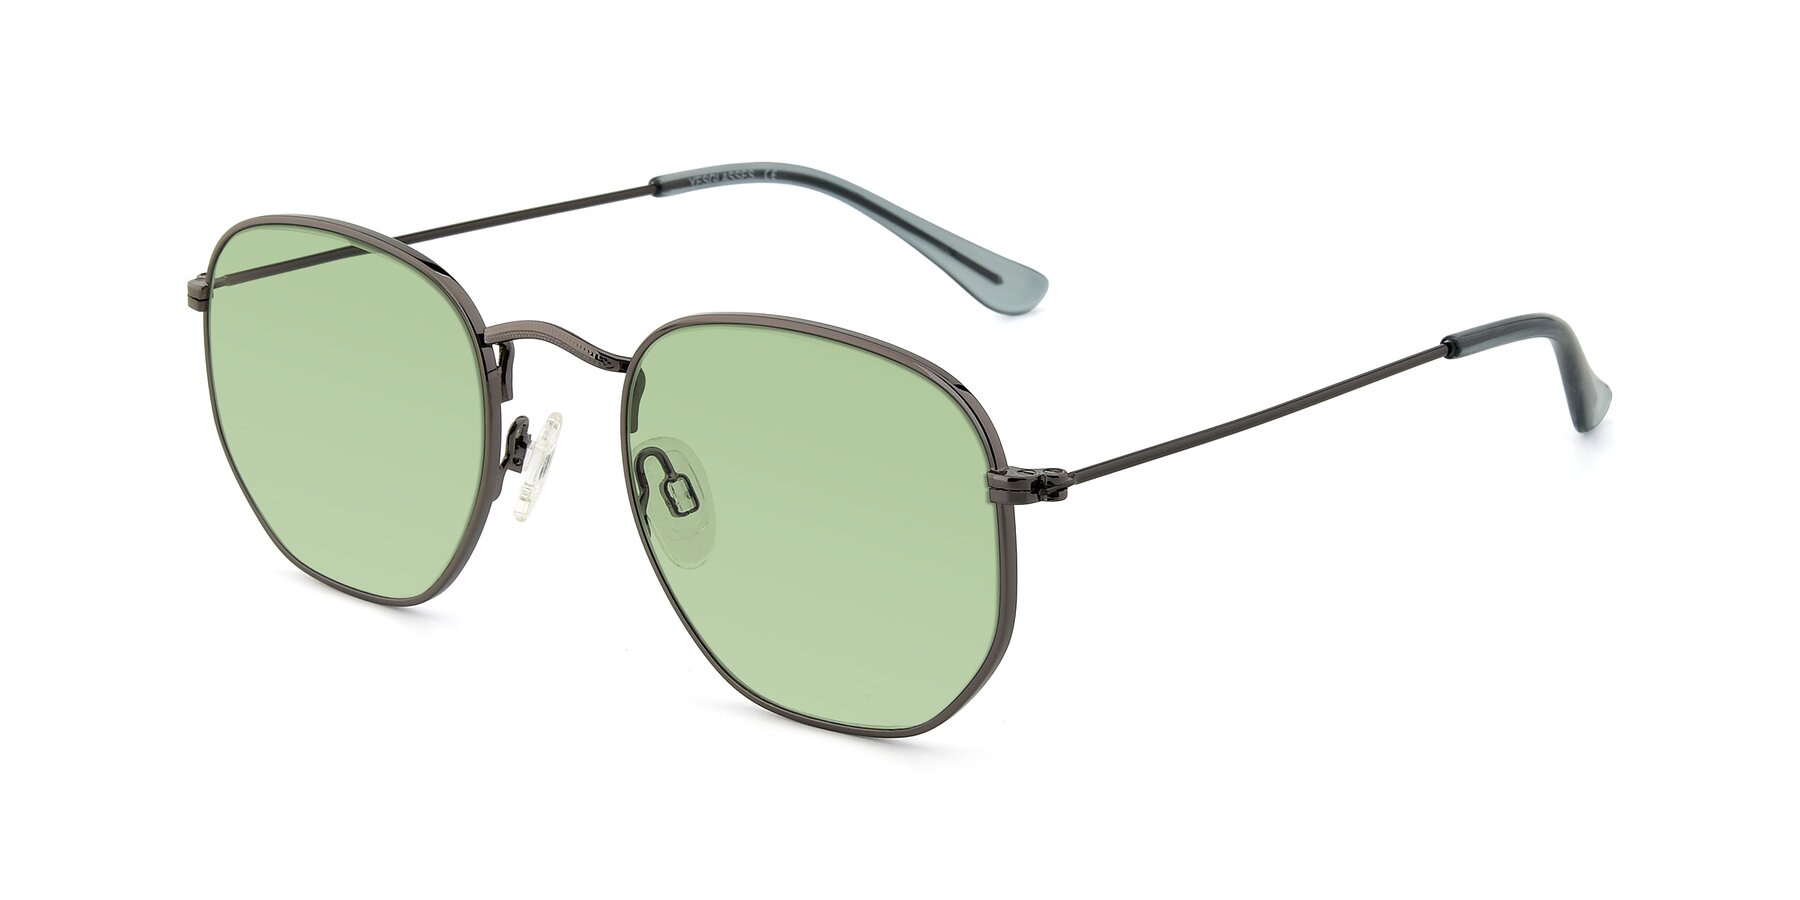 Angle of SSR1943 in Grey with Medium Green Tinted Lenses